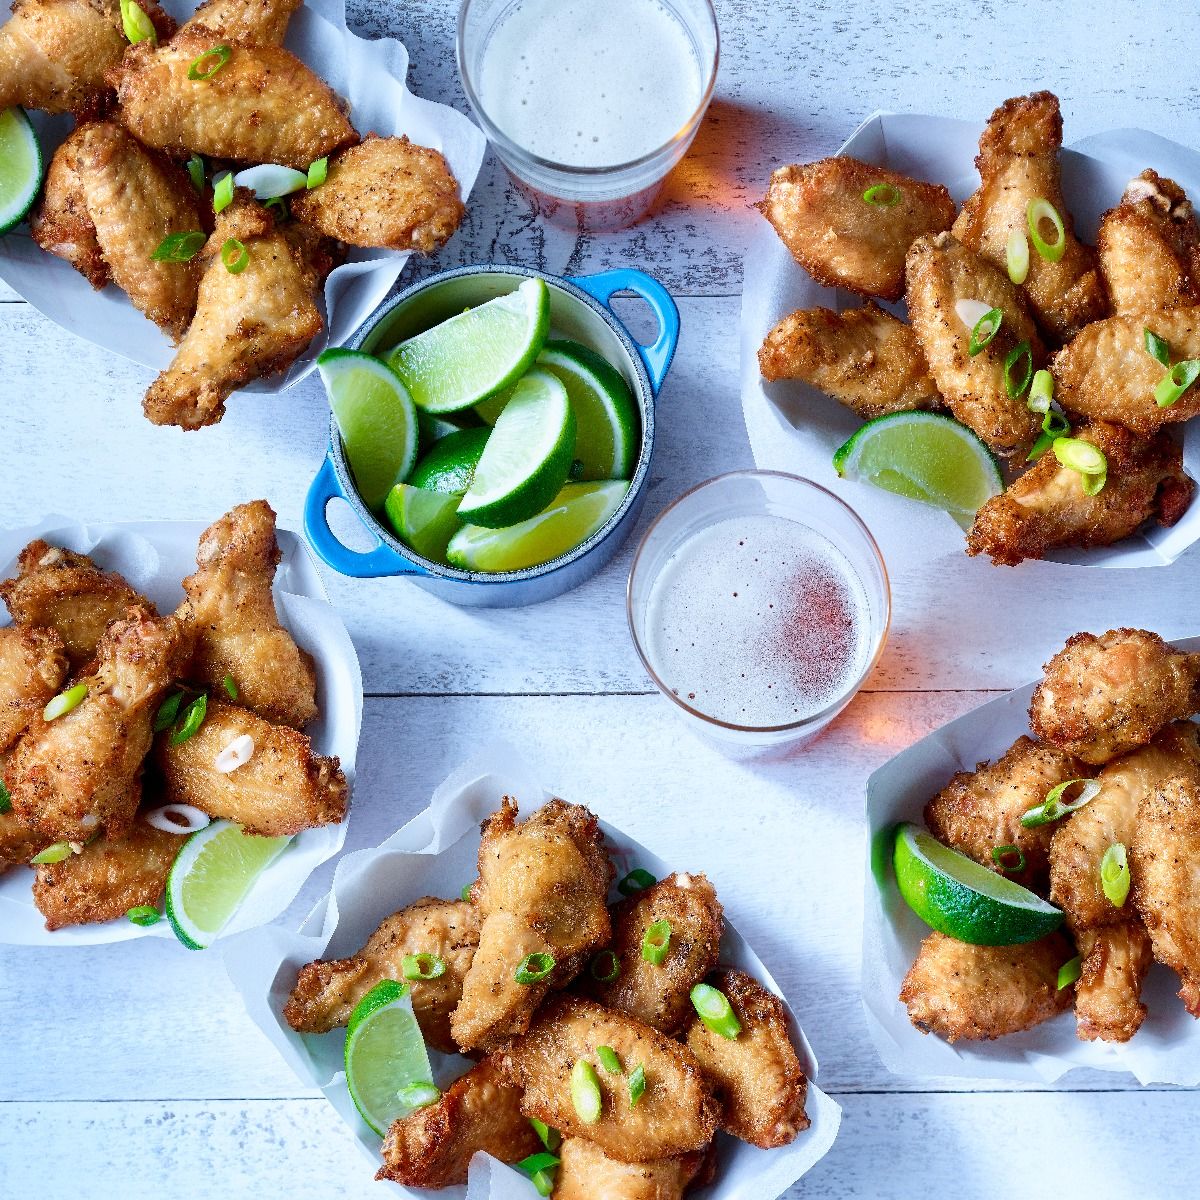 Larges salt and pepper chicken wings, cut-up, fully cooked (seasoned)